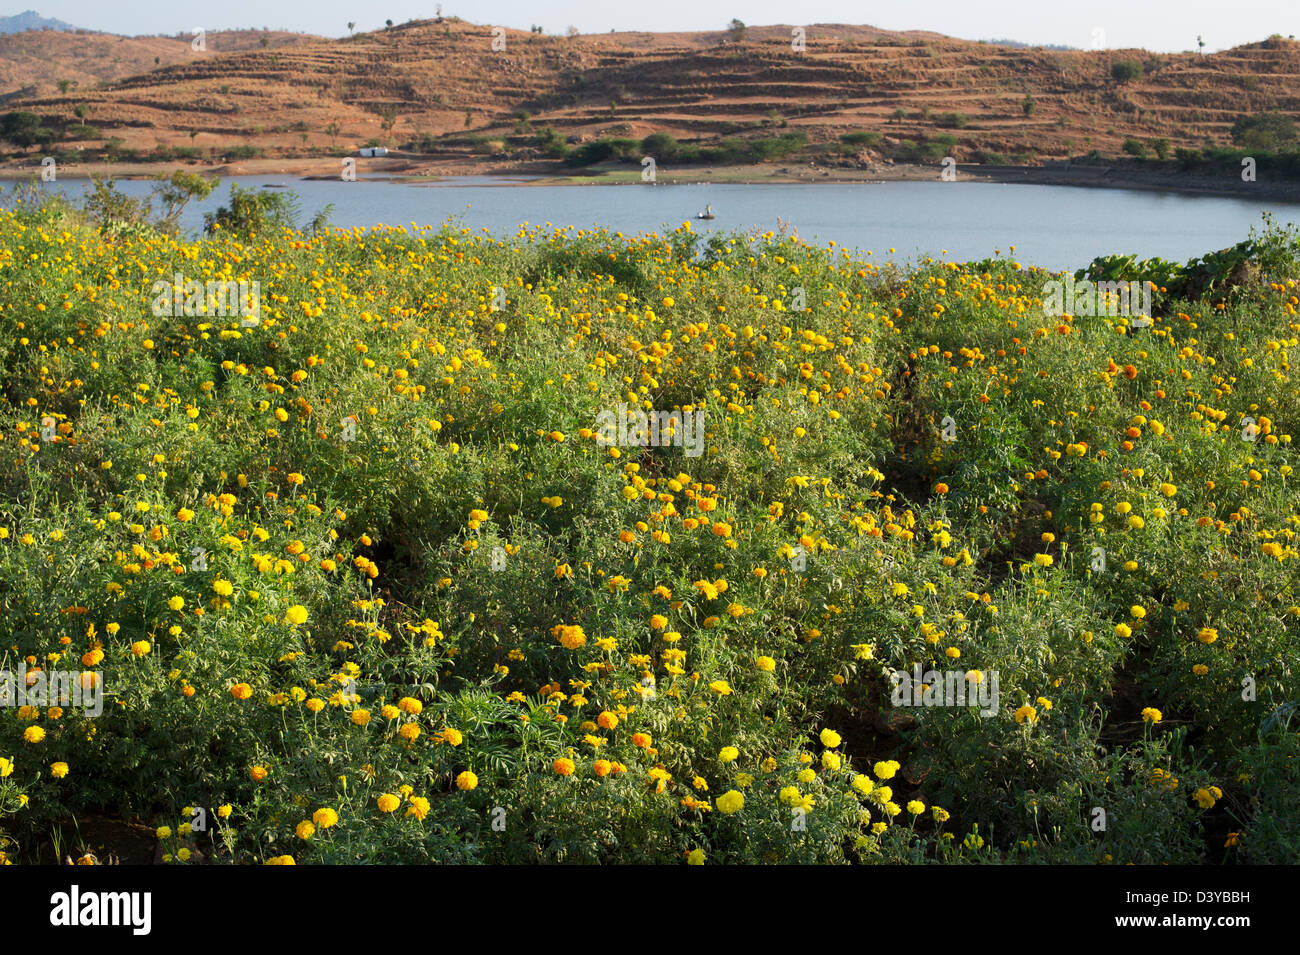 Marigold flowers cultivated in the Indian countryside for selling as religious offerings. Andhra Pradesh, India Stock Photo